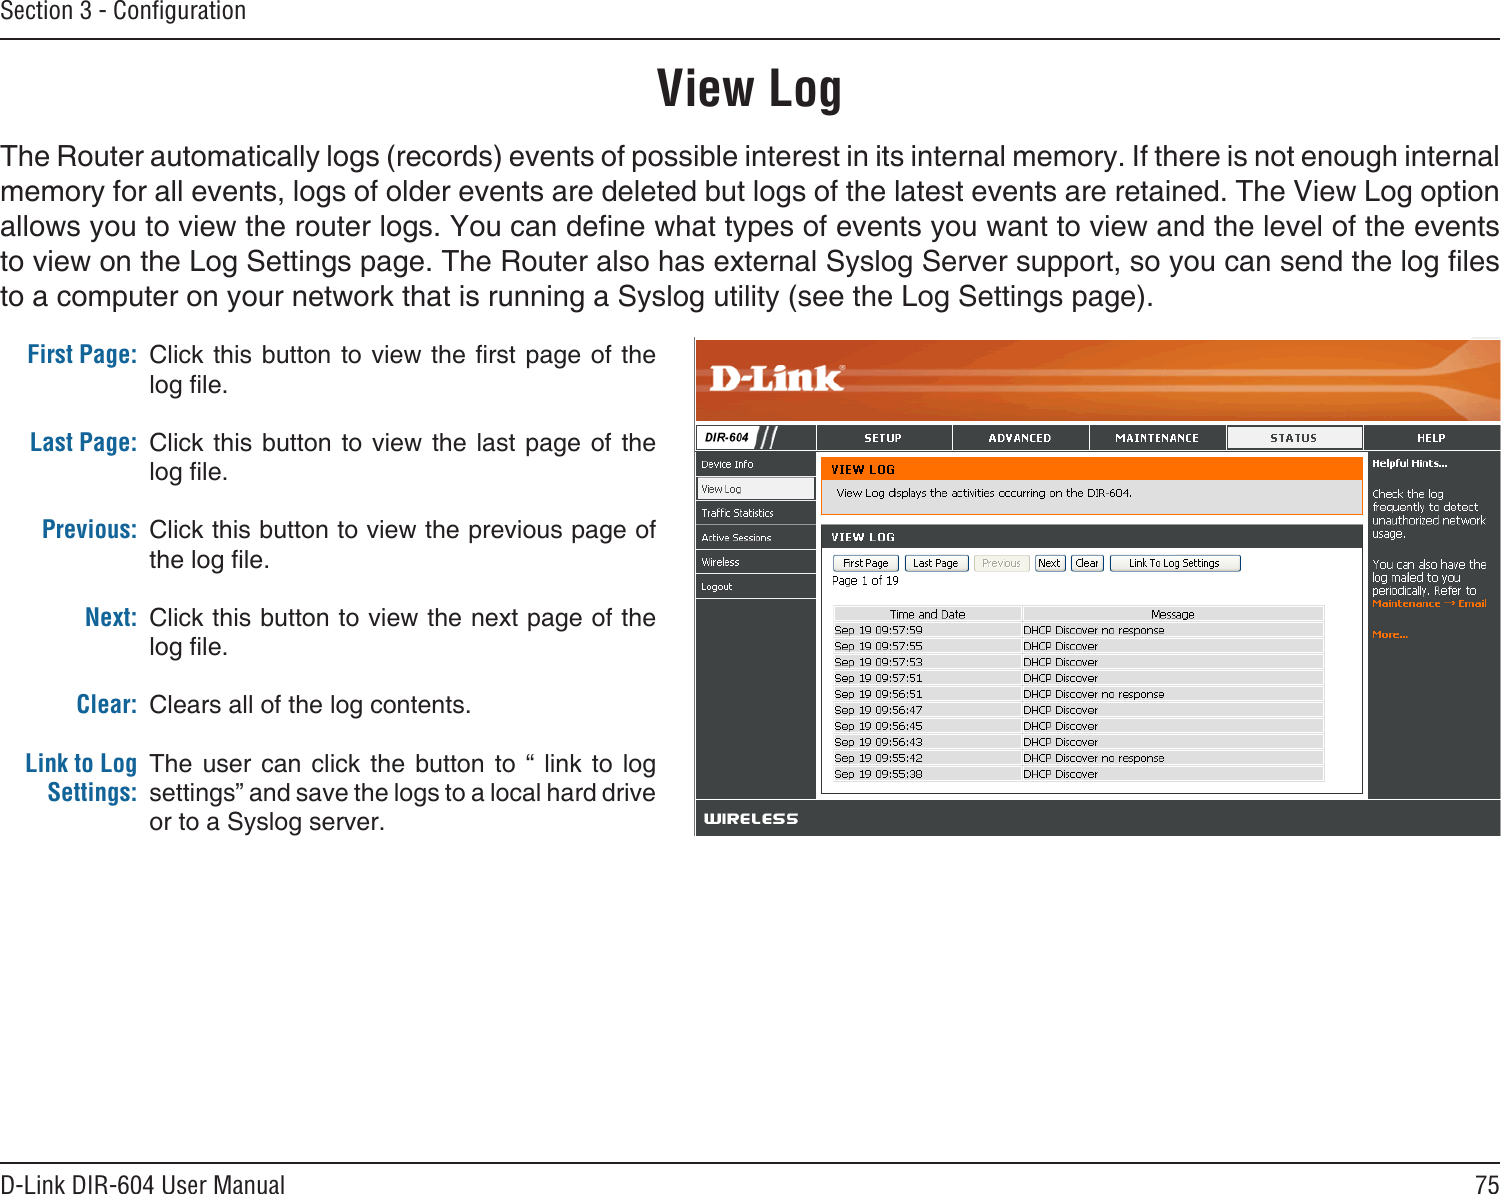 75D-Link DIR-604 User ManualSection 3 - ConﬁgurationView LogFirst Page:Last Page:Previous:Next:Clear:Link to Log Settings:Click this button to view the rst page of the log le.Click this  button  to  view the  last  page  of the log le.Click this button to view the previous page of the log le.Click this button to view the next page of the log le.Clears all of the log contents.The  user  can  click  the  button  to  “  link  to  log settings” and save the logs to a local hard drive or to a Syslog server.The Router automatically logs (records) events of possible interest in its internal memory. If there is not enough internal memory for all events, logs of older events are deleted but logs of the latest events are retained. The View Log option allows you to view the router logs. You can dene what types of events you want to view and the level of the events to view on the Log Settings page. The Router also has external Syslog Server support, so you can send the log les to a computer on your network that is running a Syslog utility (see the Log Settings page).